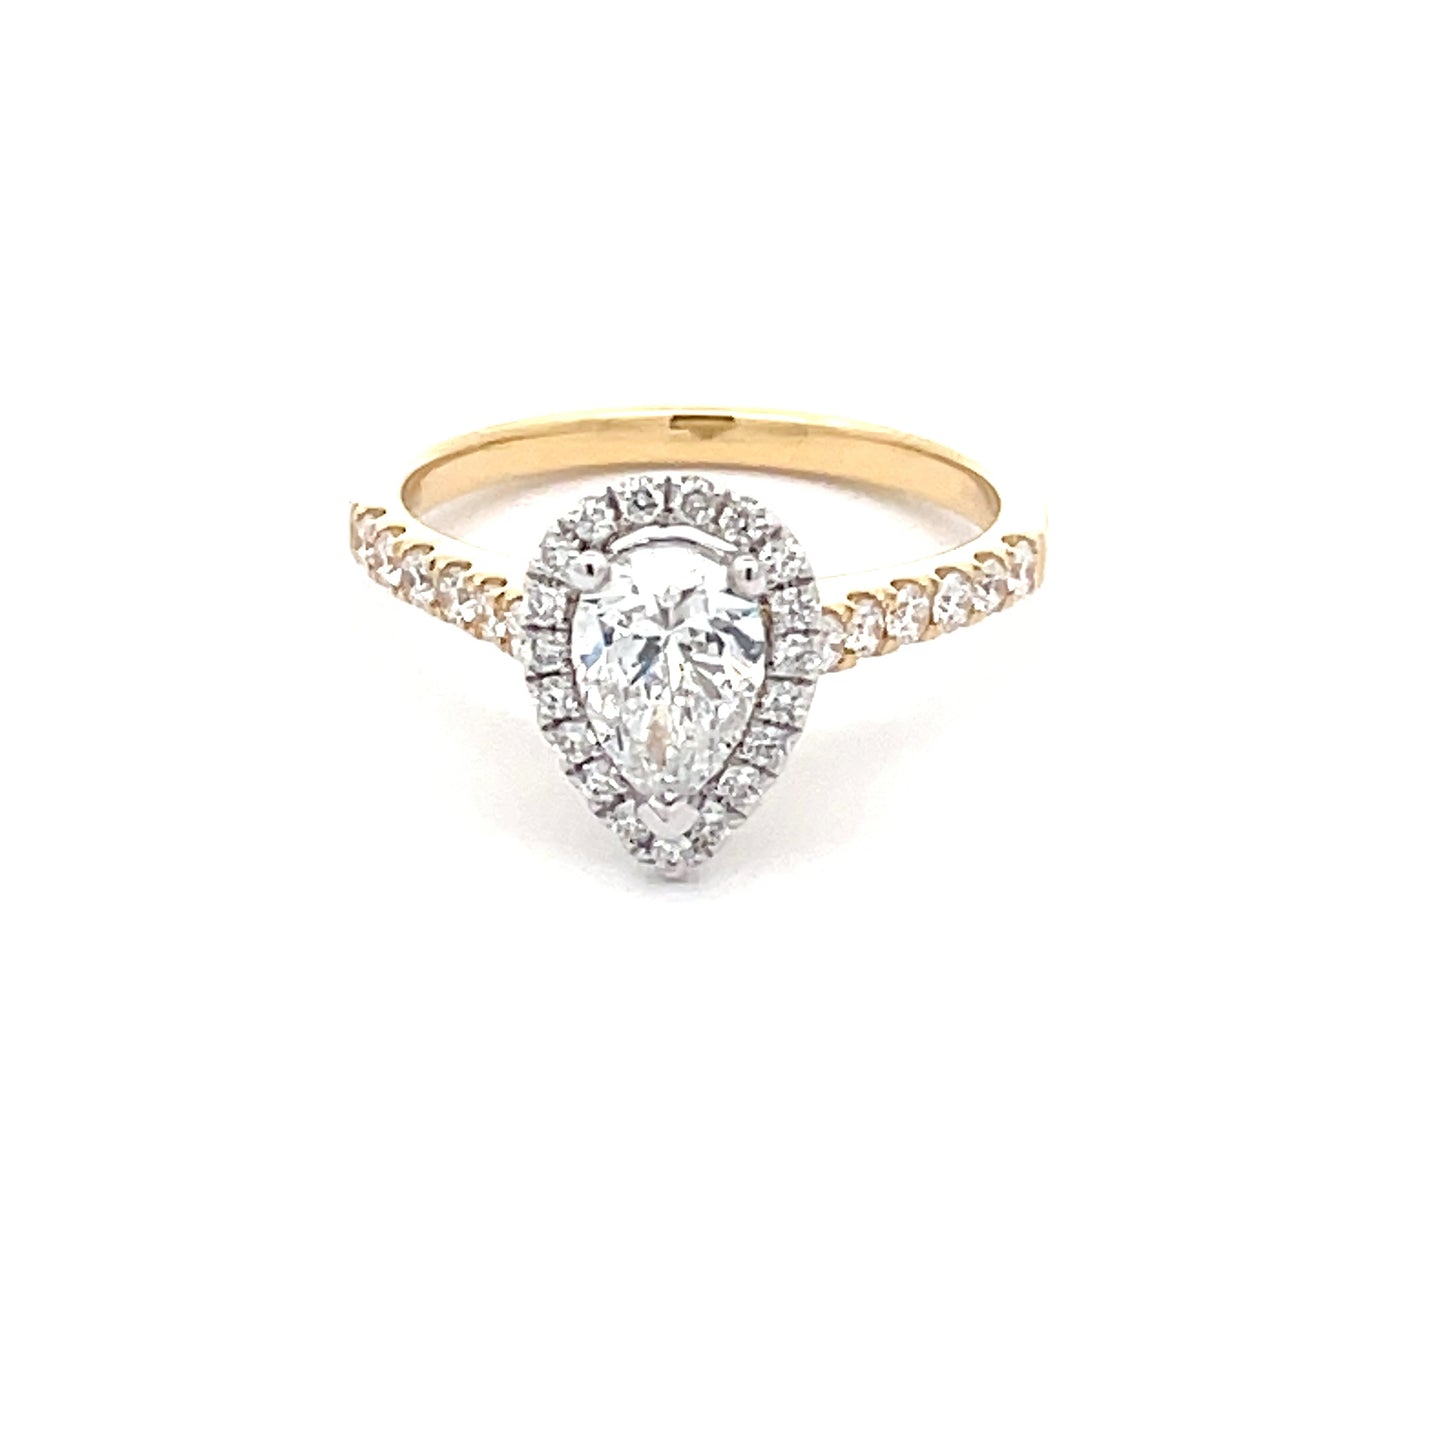 Pear Shaped Diamond Halo Style Ring - 1.04cts  Gardiner Brothers   